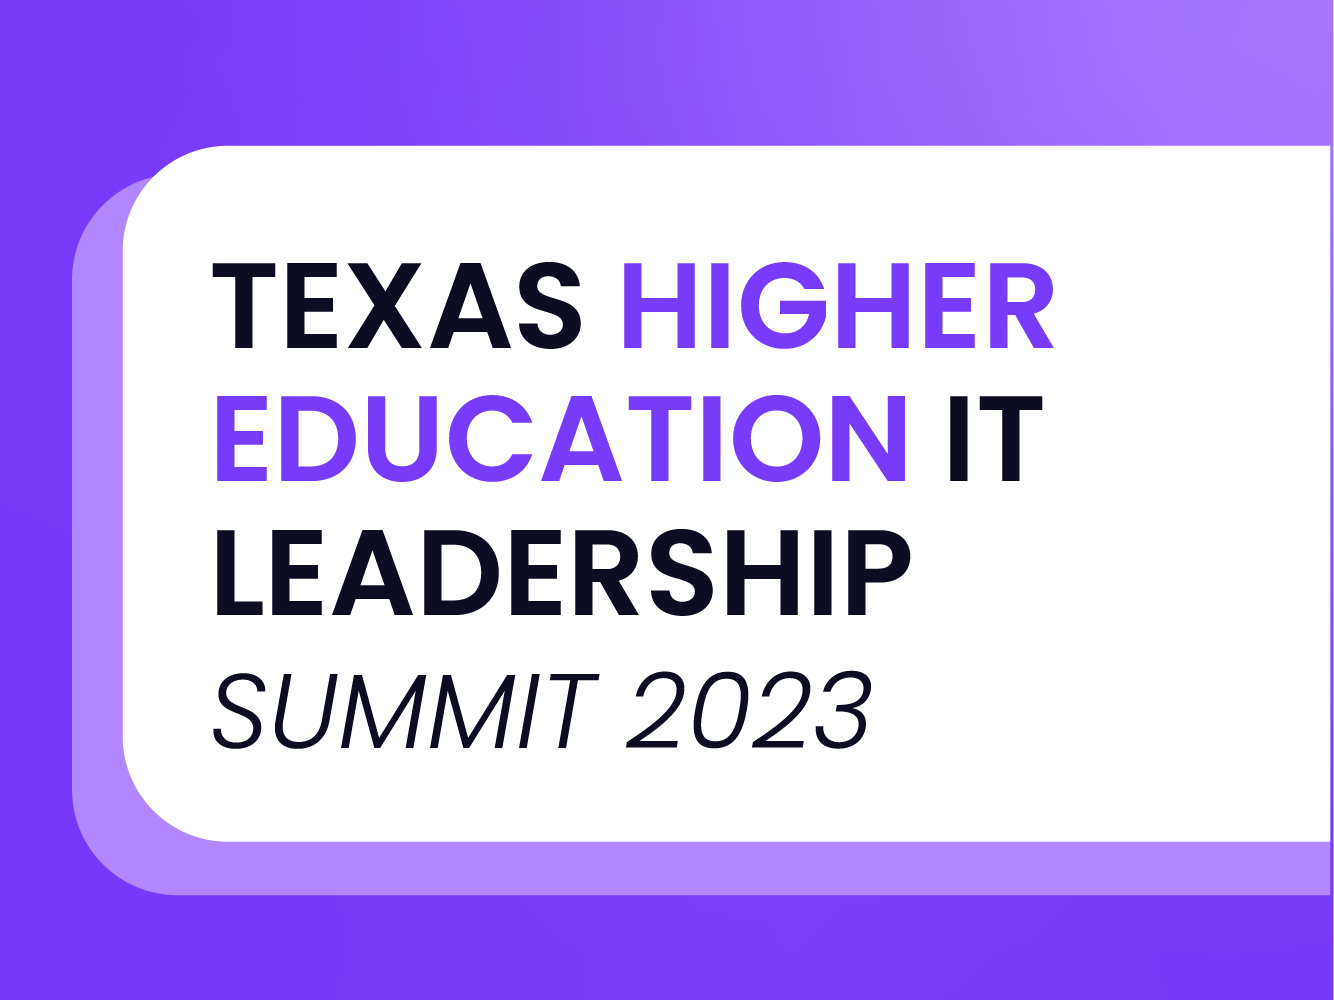 ProcessMaker is attending the Texas Higher Education IT Leadership Summit